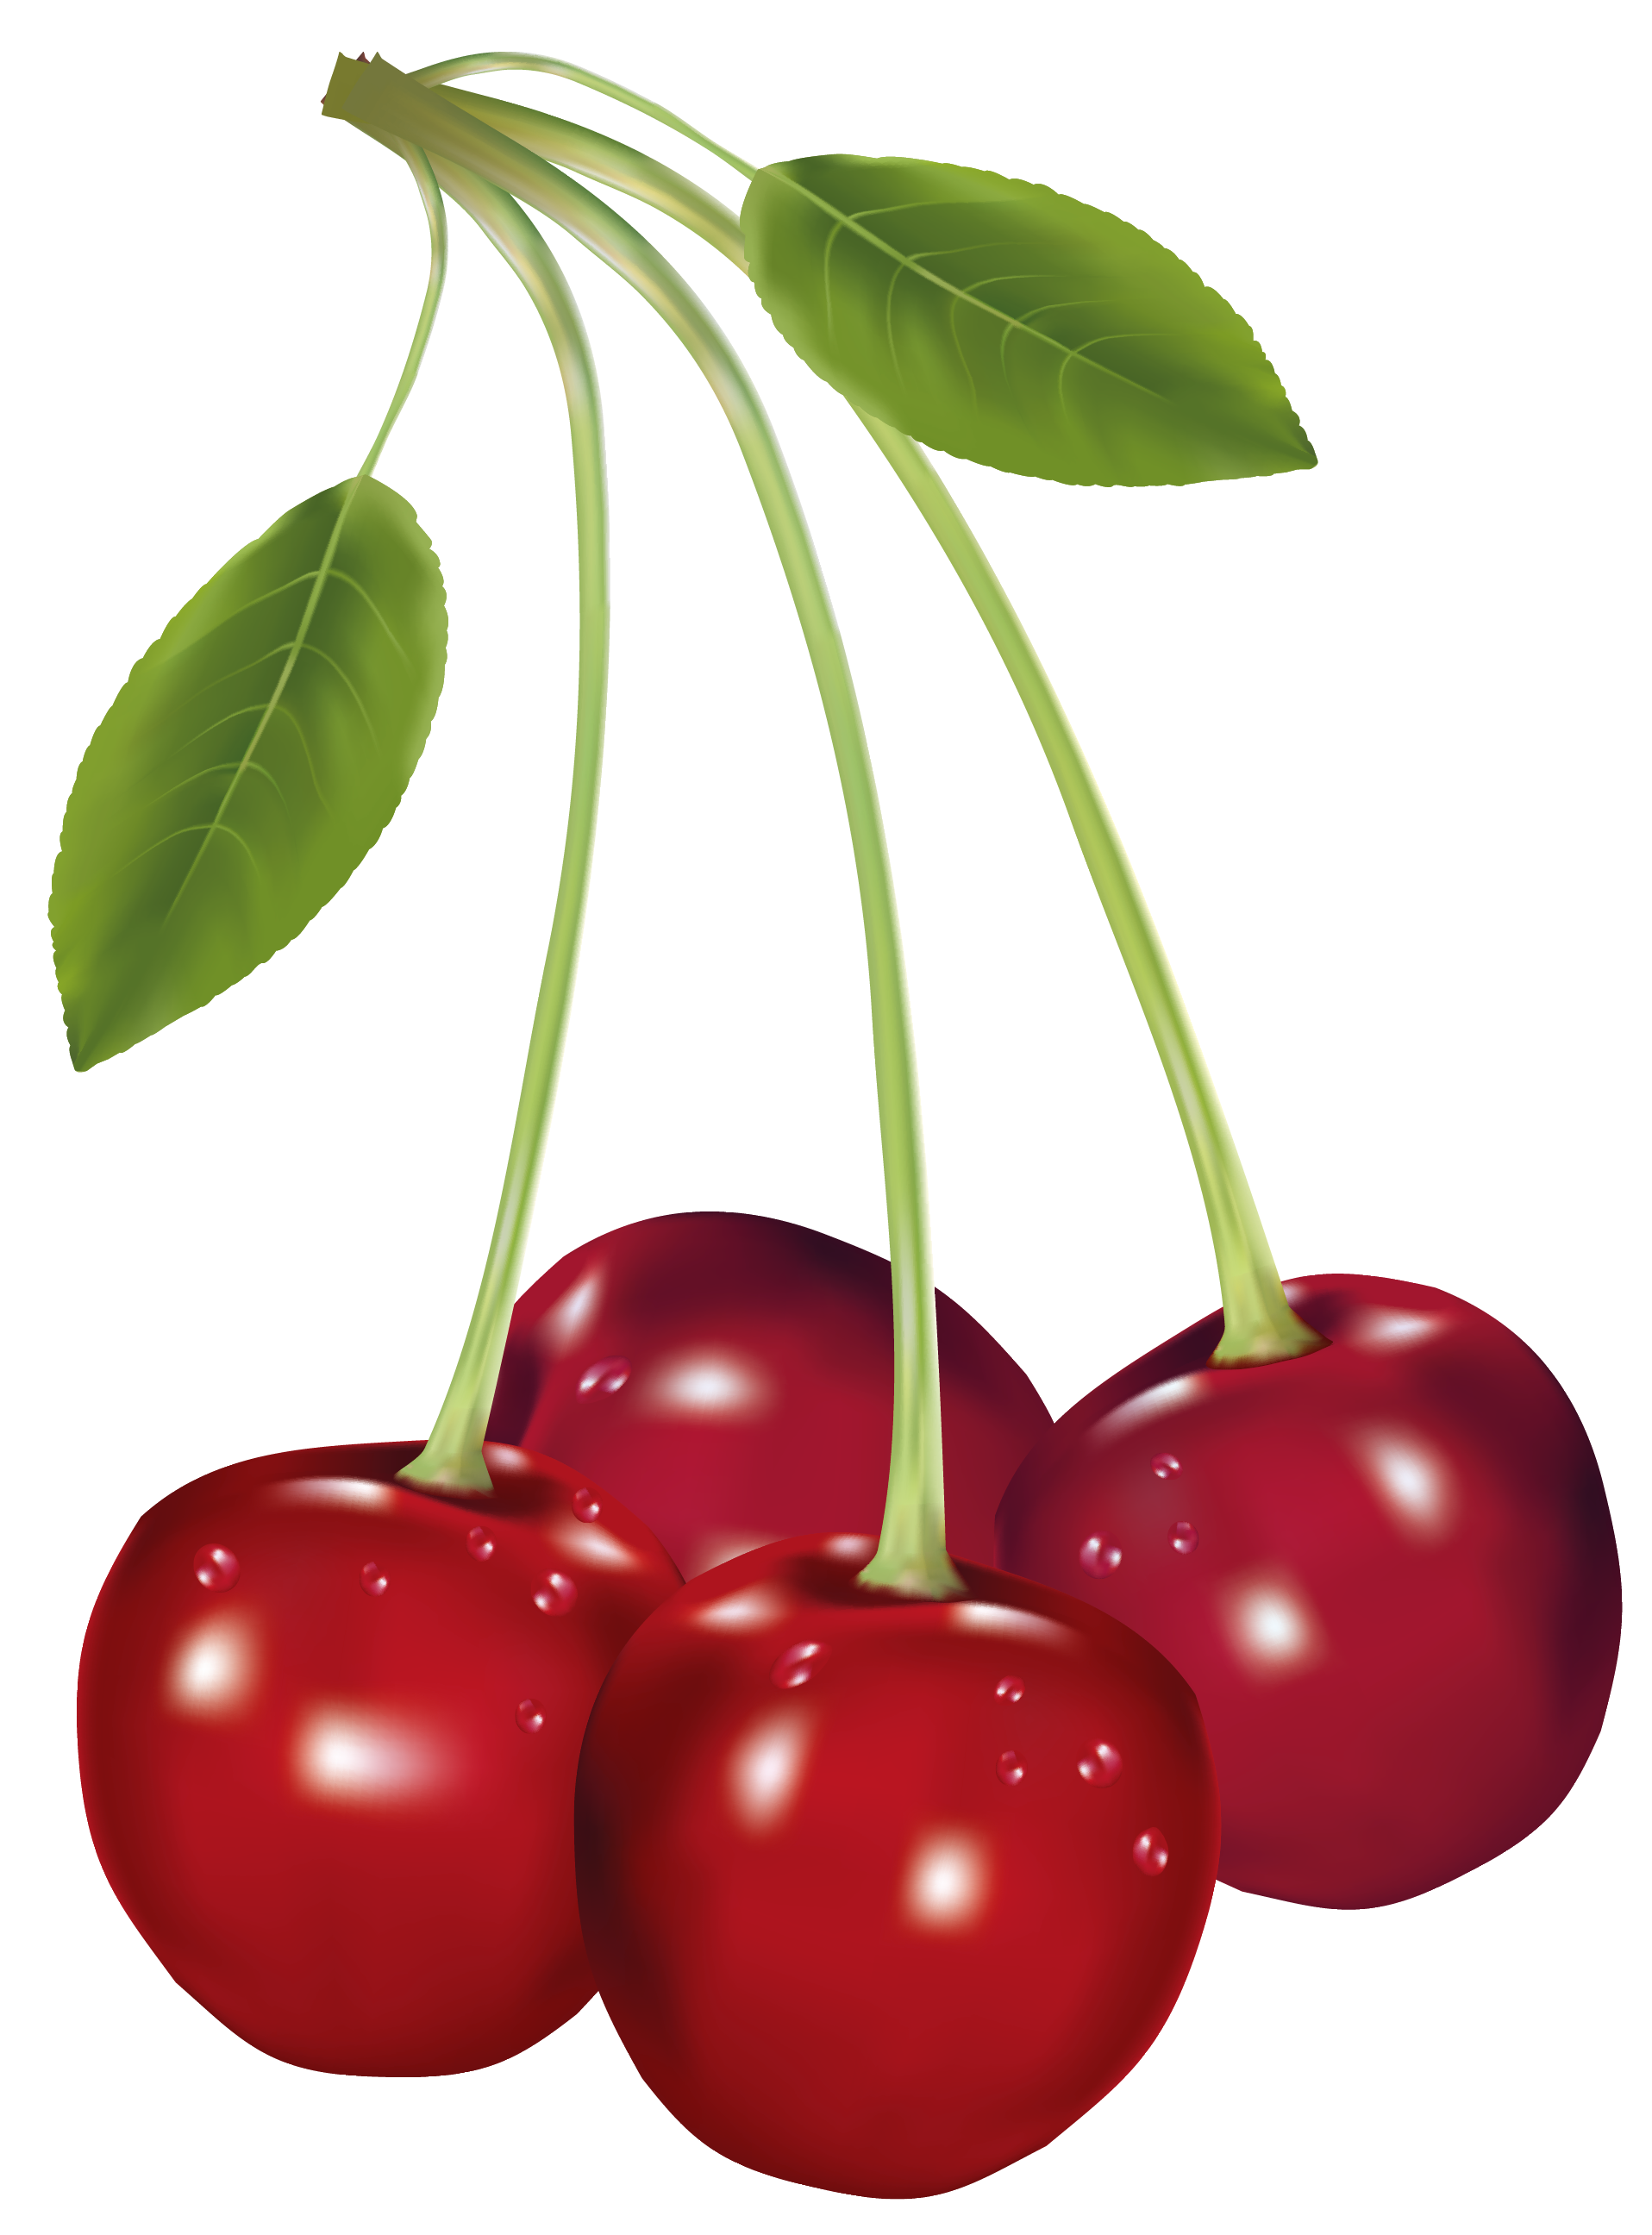 clipart images of fruits - photo #28